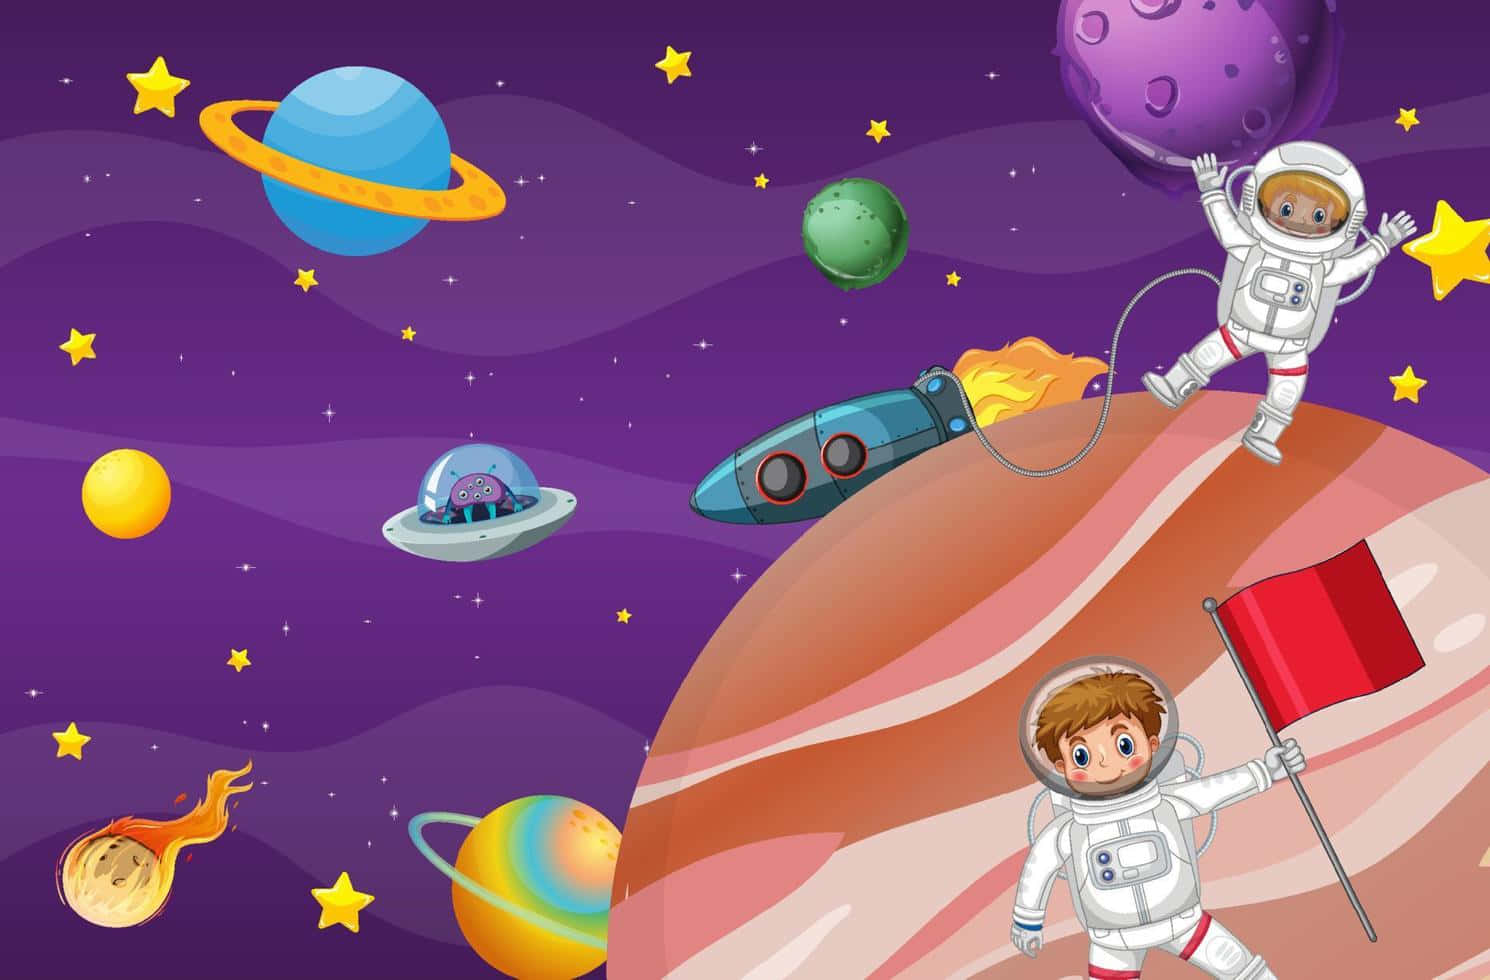 Explore a Sci-Fi World Inspired By Cartoon Animation